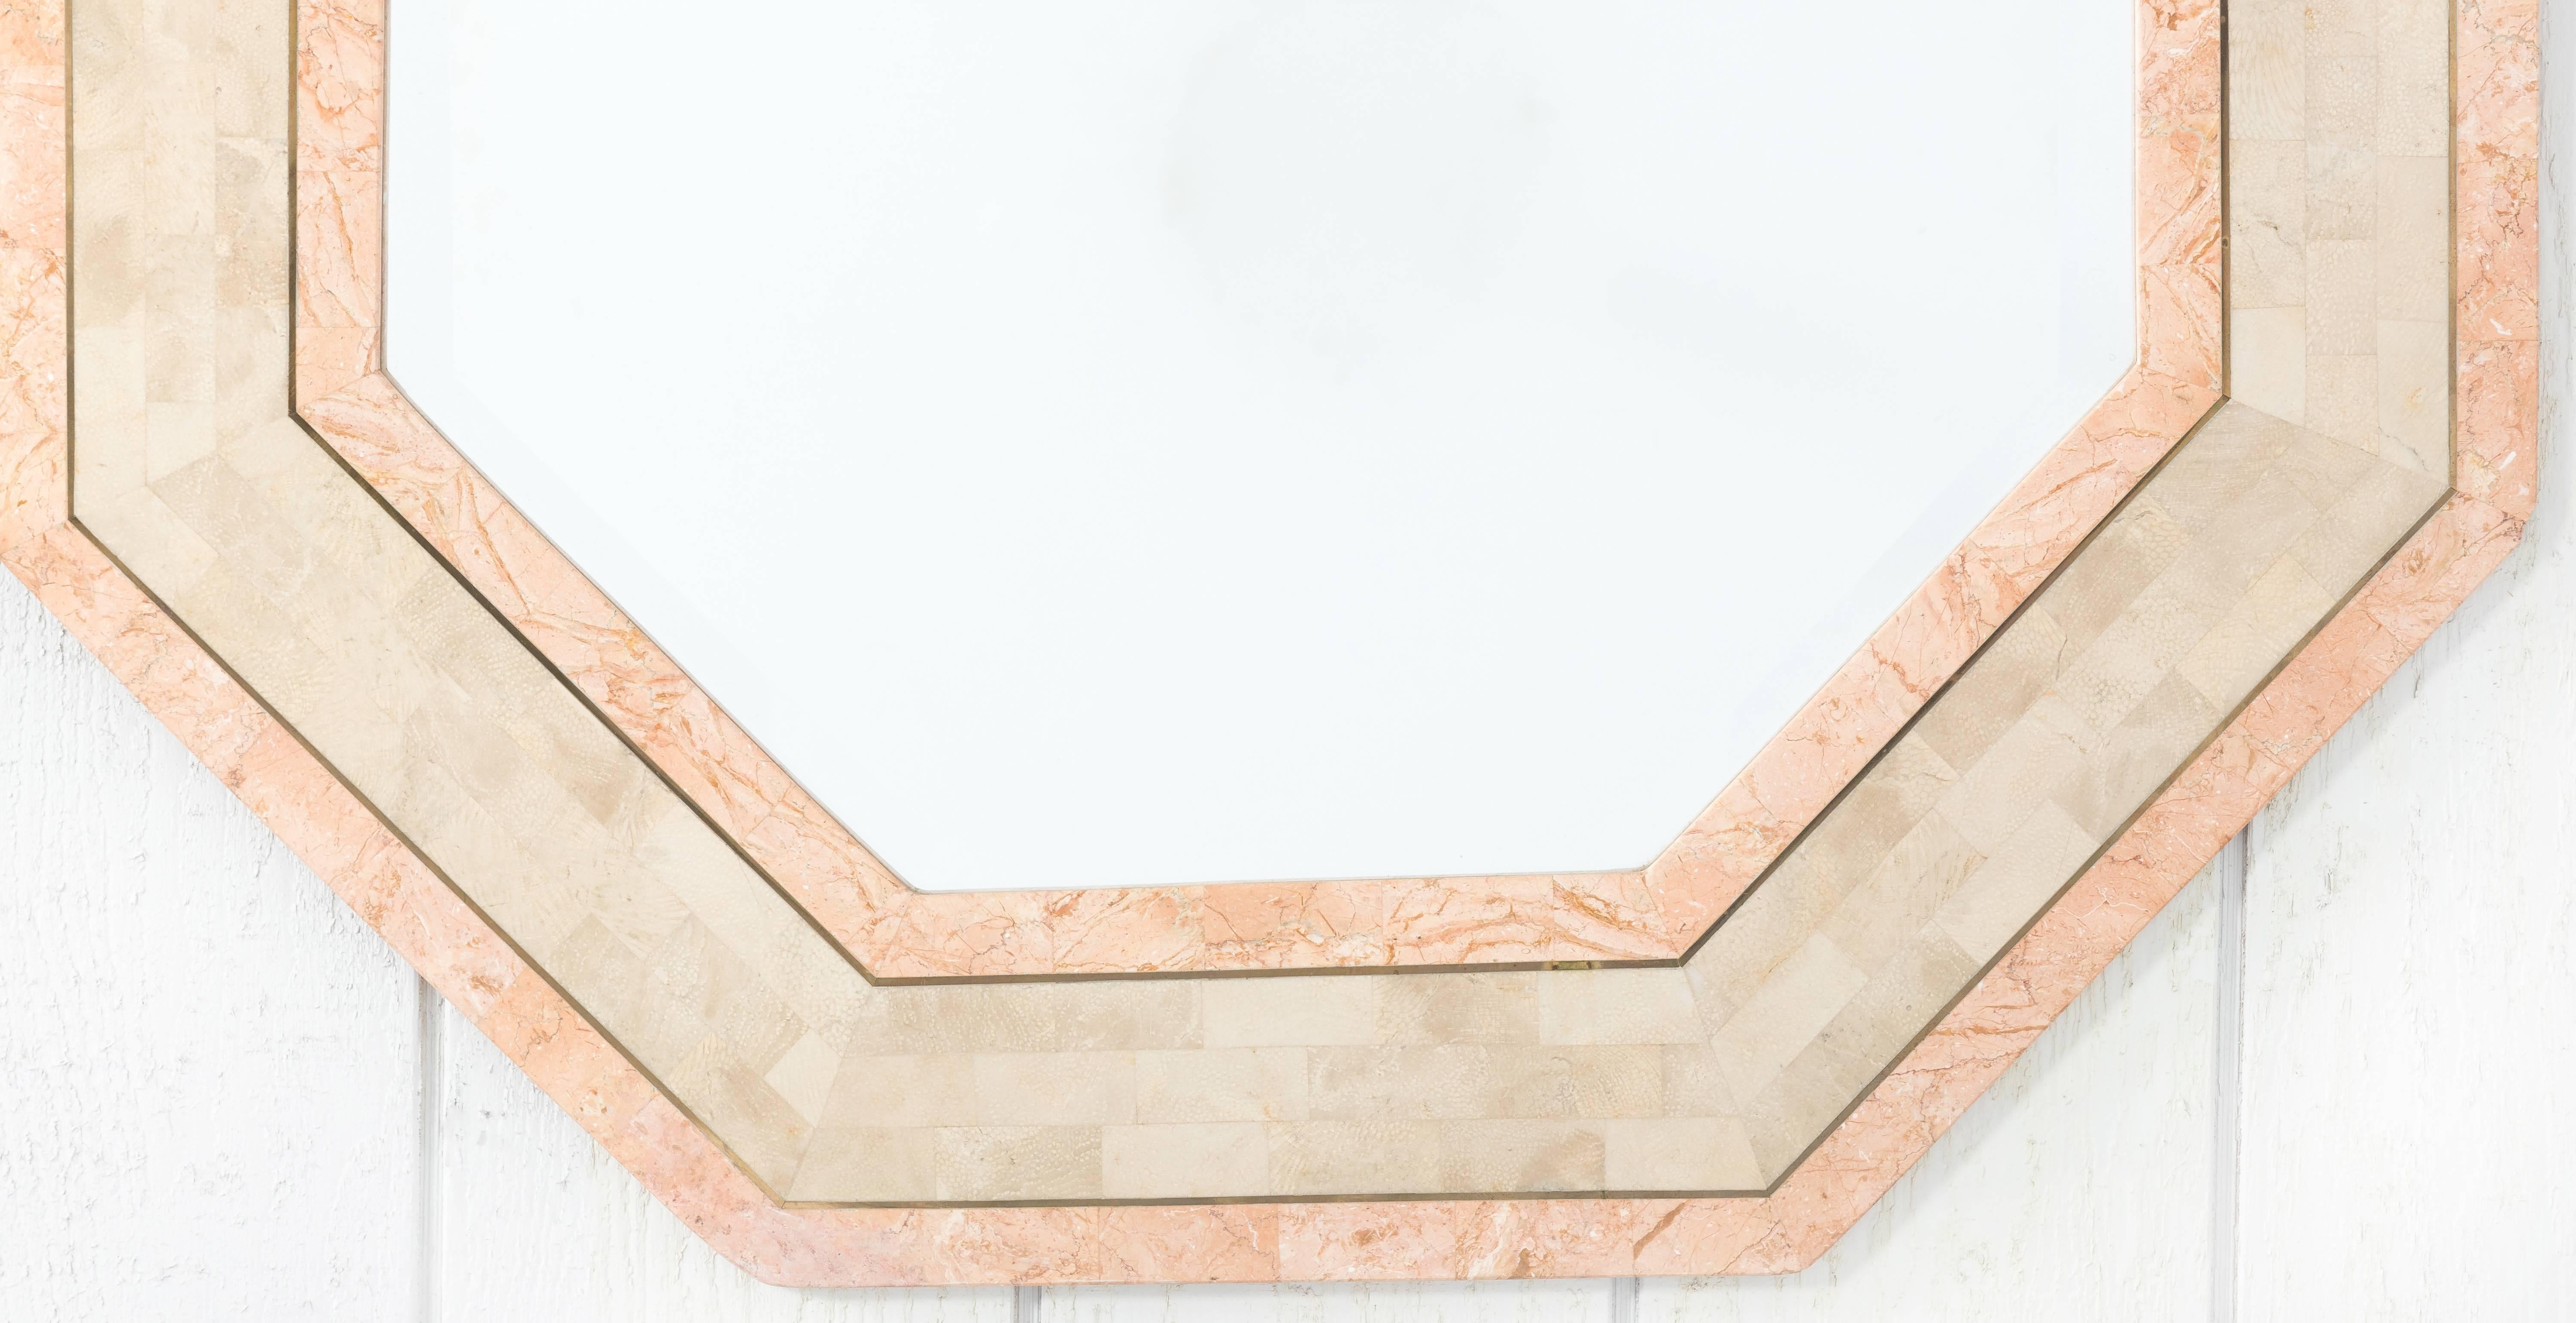 Stone octagonal mirror by Maitland-Smith. Beige and light pink tessellated stone with brass banding. Original beveled mirror. No makers mark.
  